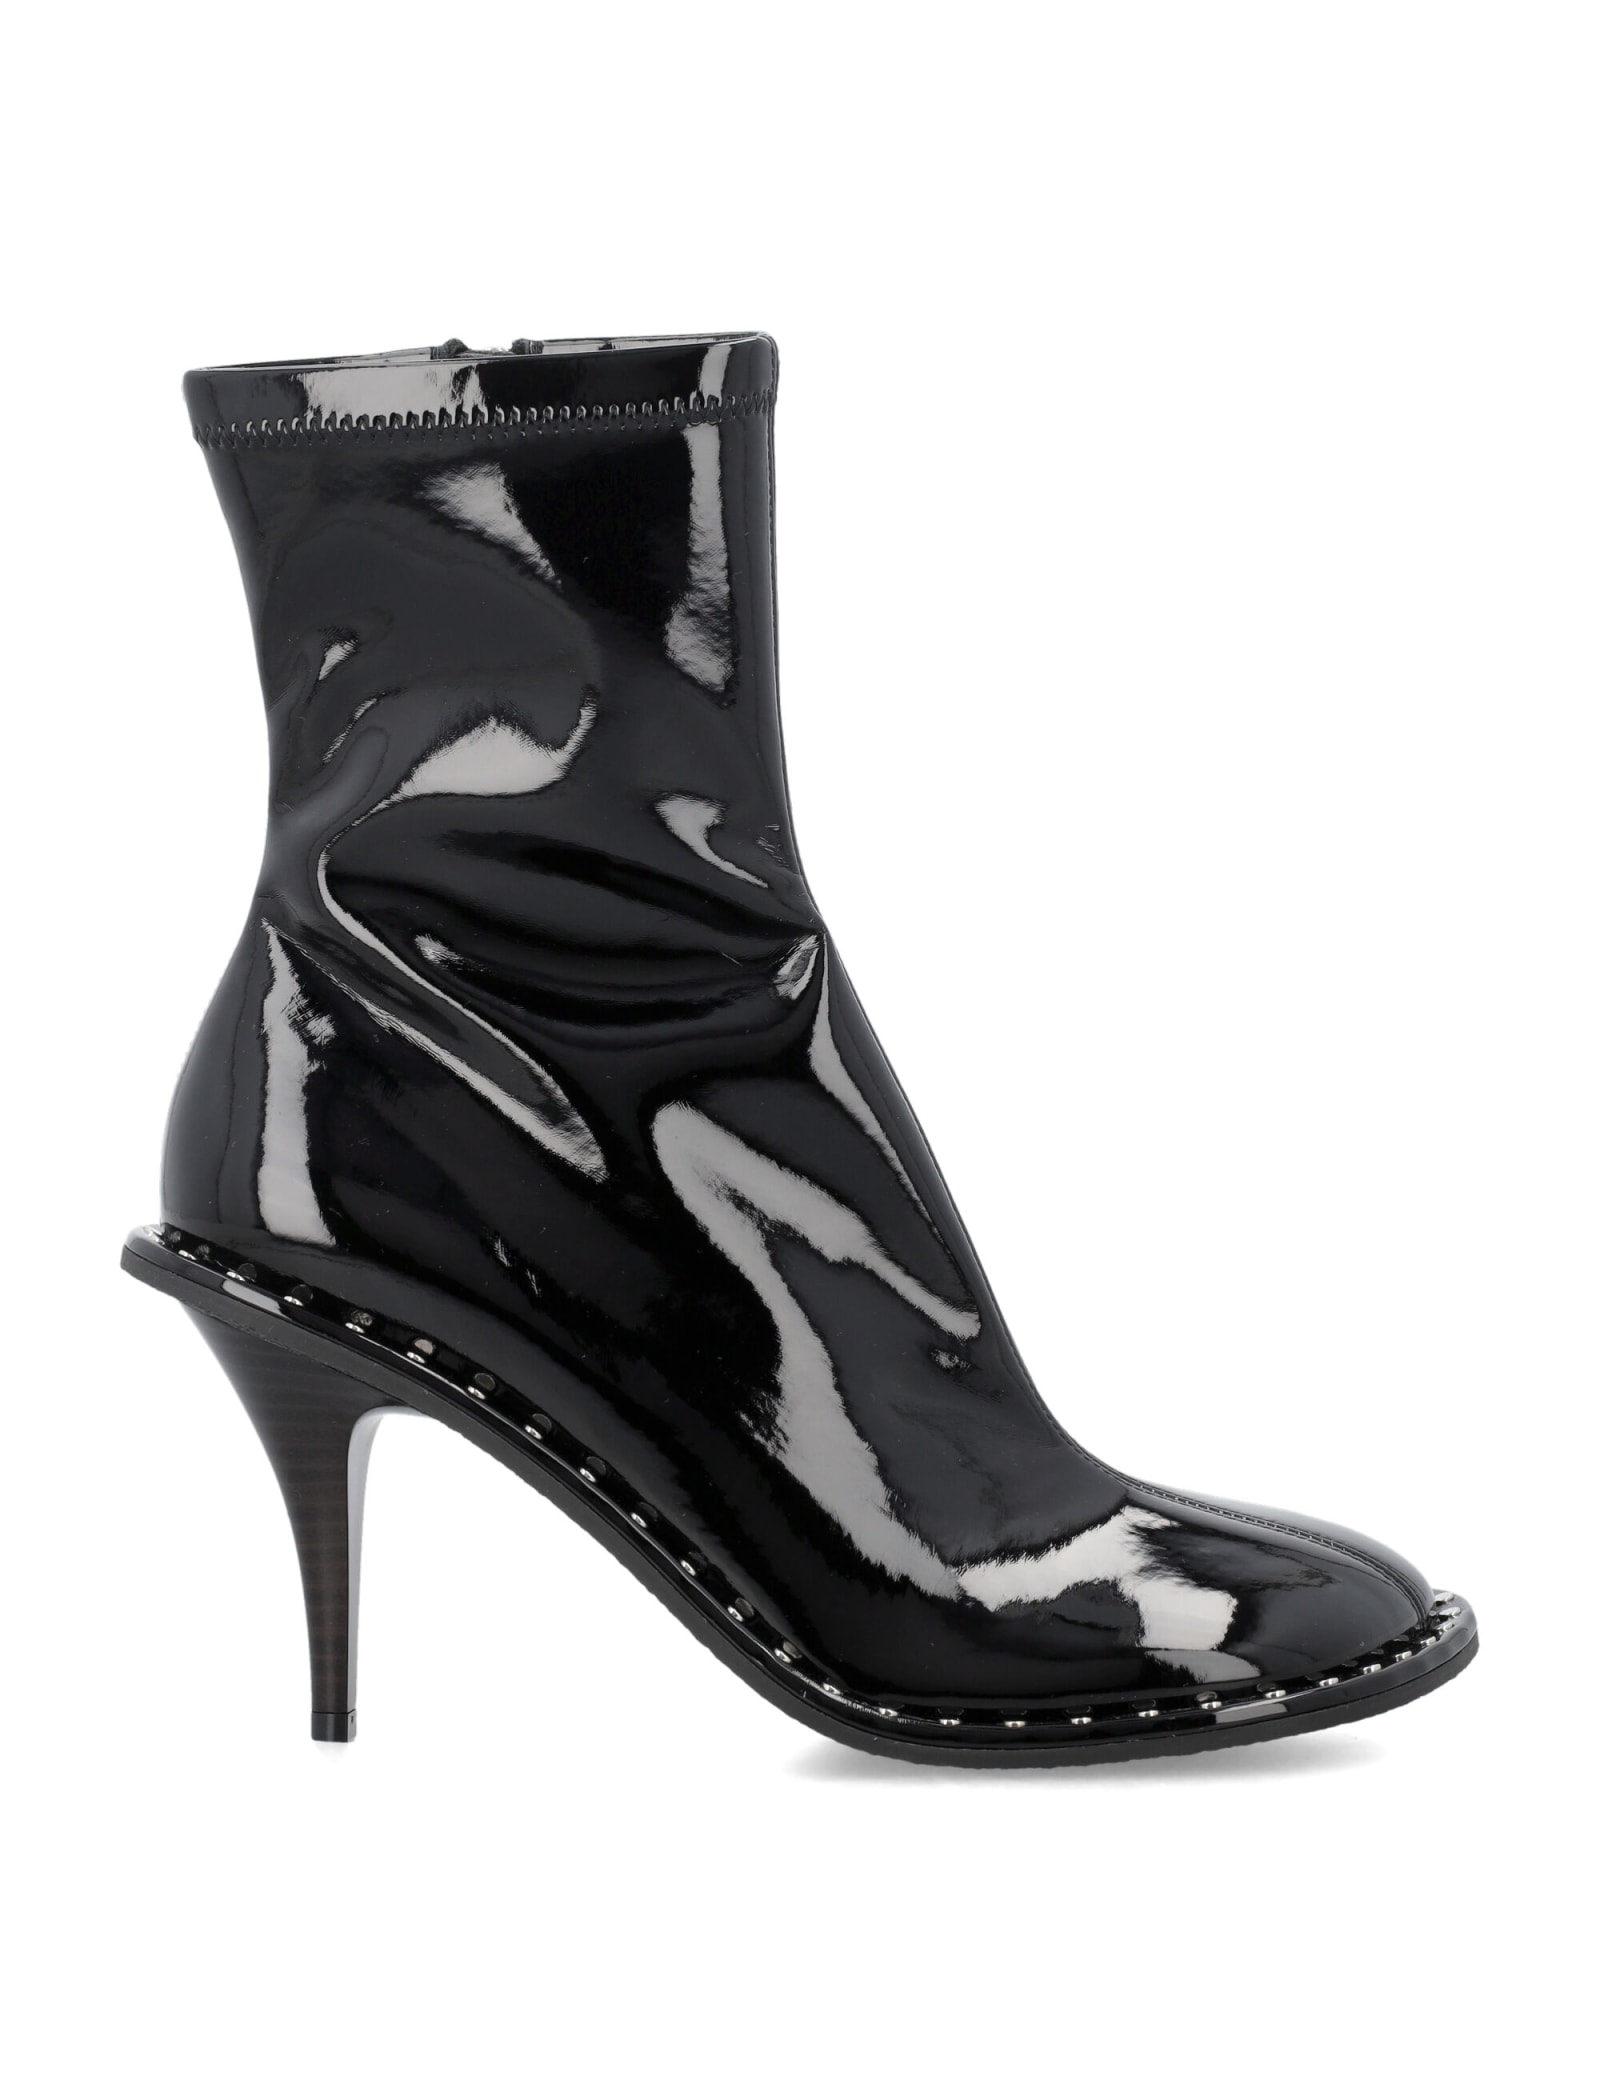 STELLA MCCARTNEY RYDER LACQUERED STILETTO ANKLE BOOTS